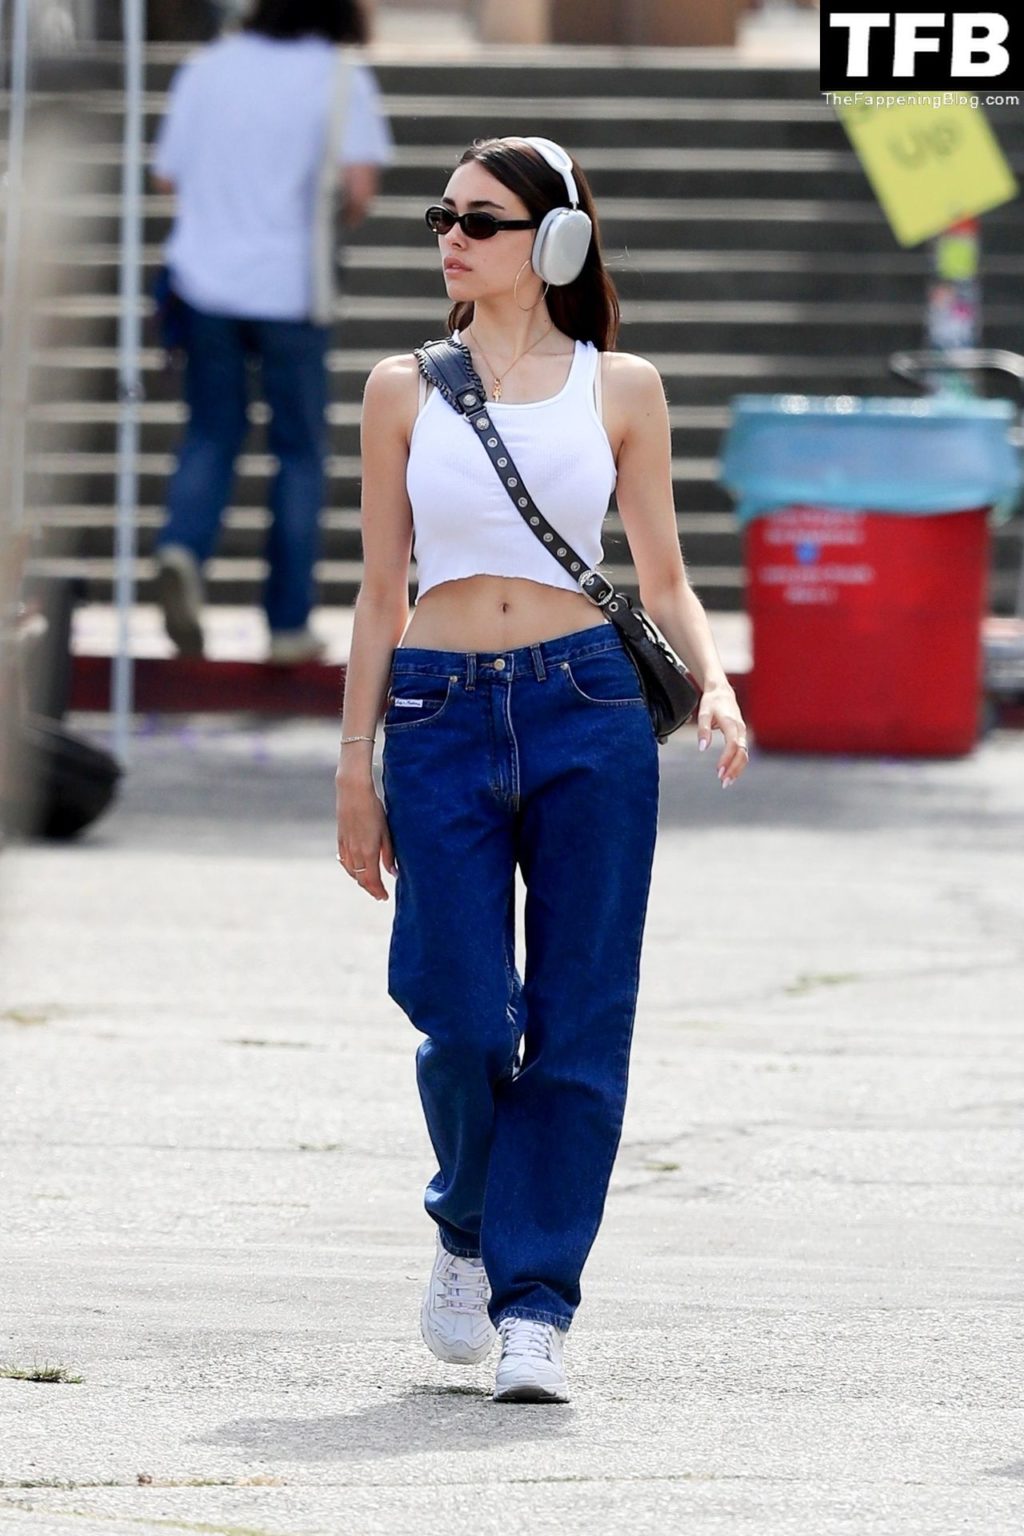 Madison Beer Sexy The Fappening Blog 30 1024x1536 - Madison Beer Wears a Tiny Crop Top Revealing a Toned Waist While Shopping in LA (39 Photos)